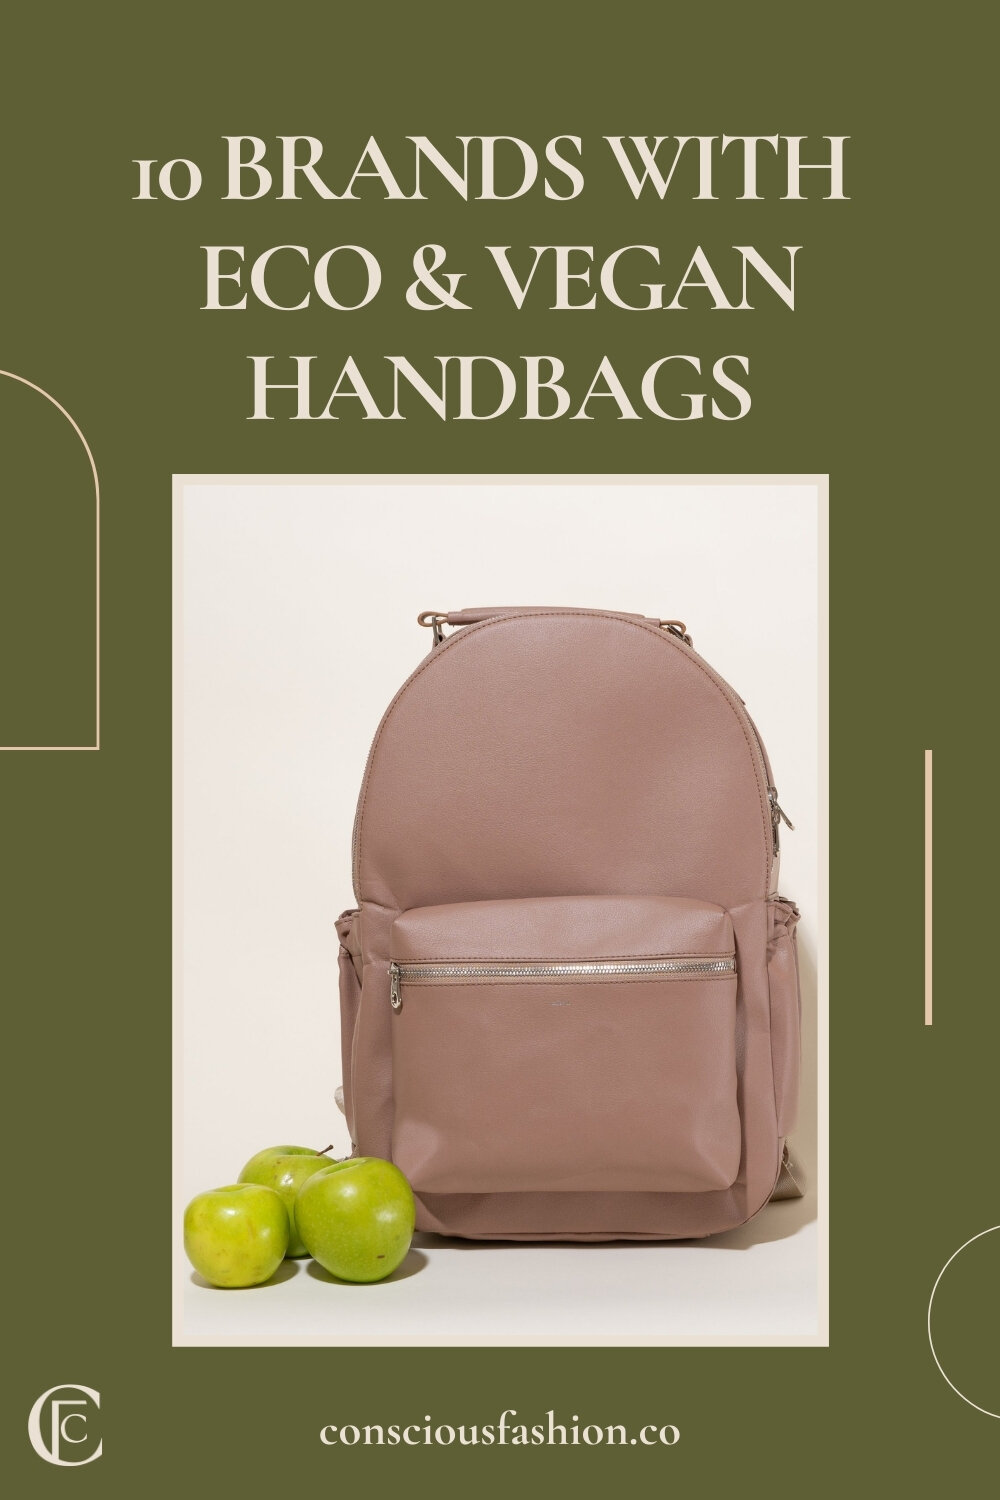 Sustainable and vegan bag brands to know - Her World Singapore